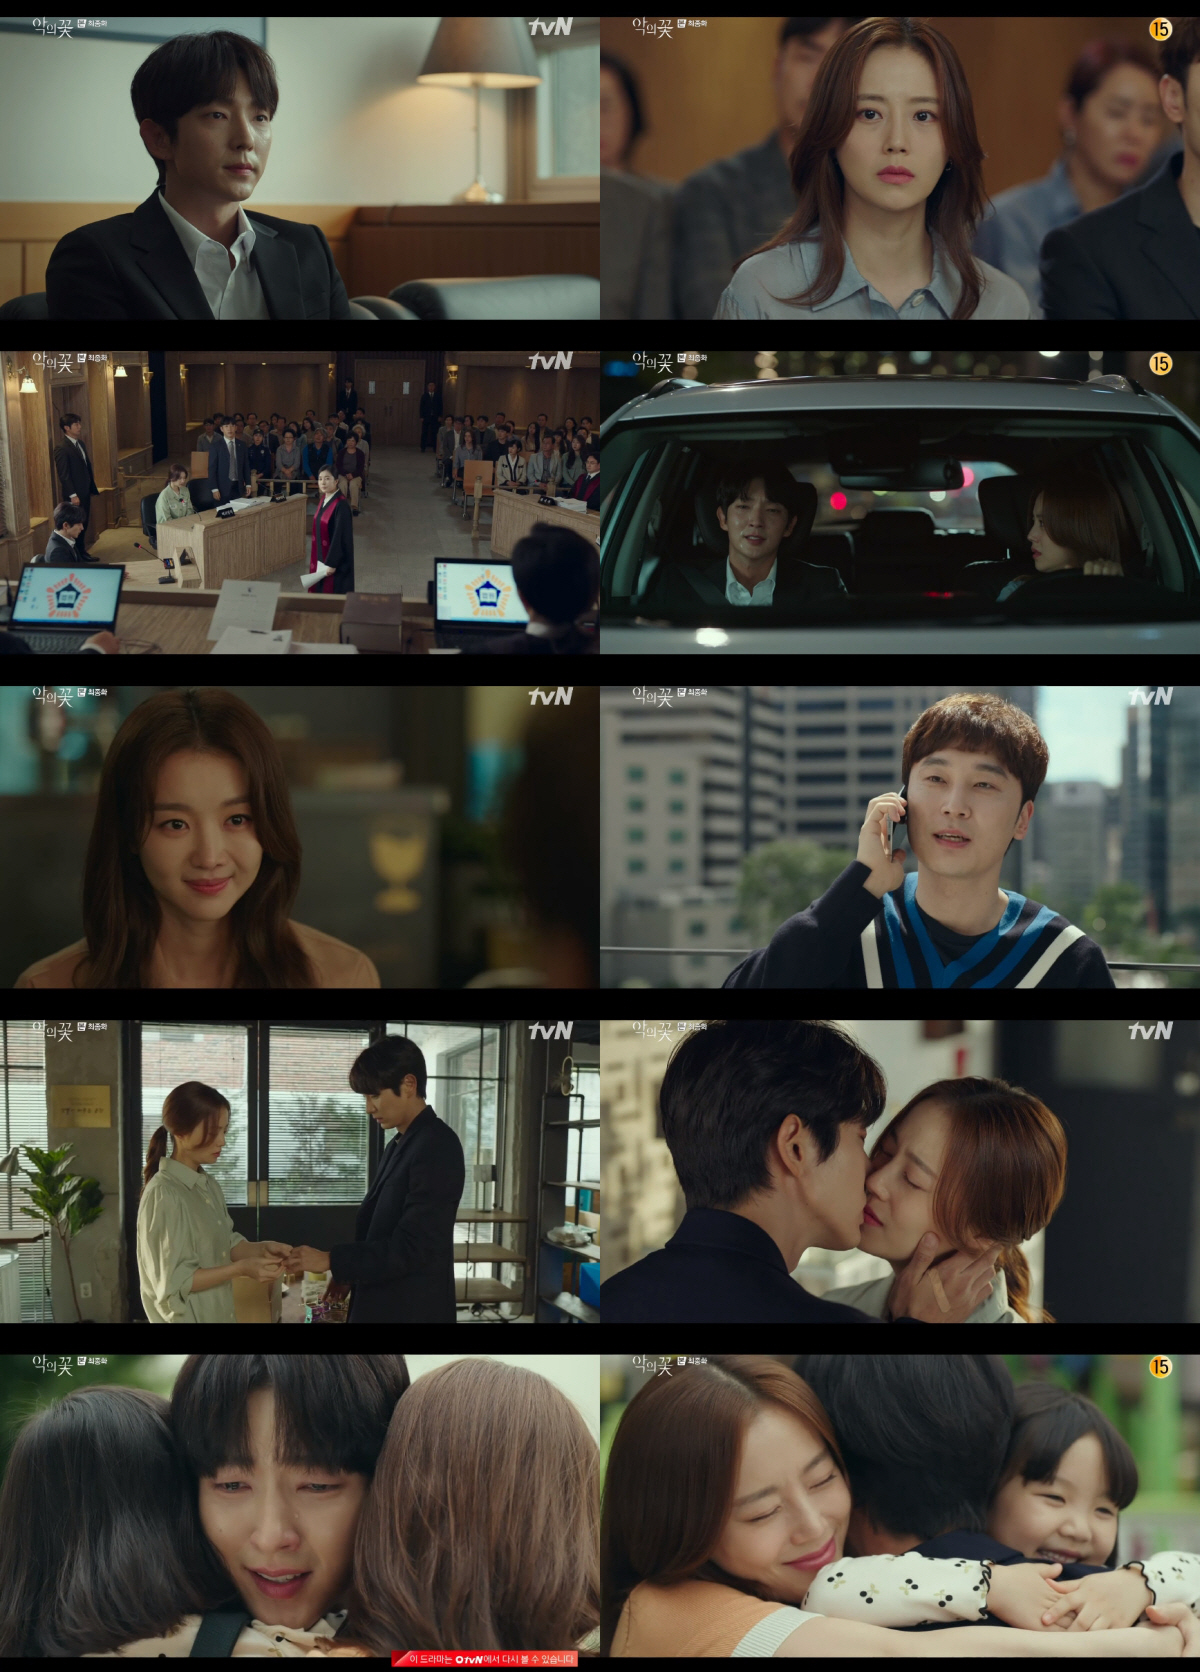 Lee Joon-gi and Moon Chae-won in The Flower of Evil  welcomed the end of the heartbreaking end and another start with the belief in love.In the last episode of the day, Do Hyun-soo (Lee Joon-gi), who had lived with his own loss, once again realized his love for Moon Chae-won and stood at a new starting point.The ending ended with a view of the second-story house, which regained its laughter, Do Hyun-soo, who shed tears in a sense of happiness, his wife, Cha Won, and daughter Baek Eun-ha, who cherished each other, gave a heartfelt impression.The serial murder case in the performance, which has been excitingly unfolding while holding the hearts of the viewers, has been completely closed due to the atrocities of Baek Hee-sung (Kim Ji-hoon).Do Hae-soo (Jang Hee-jin), who was released from the real crime of the Ka Kyung-ri murder case, left the shadows of the past and went to study abroad for the first time to find a new starting point for my life.Kim Moo-jin (Seo Hyeon-woo) still expressed his mind about Do Hae-su, and he also showed his growth by shaking off the burden of his past mind.So everyone made their own choices and regained their daily lives.Do Hyun-soo, who was trapped in the prejudice of others and doubted himself, broke the wall and realized his mind, and firstly said the same words as the Confessions she gave 14 years ago to the car support who taught him love.The completion of the perfect Sumi-Muscle that each other saved each other and led to a new world was enough to leave an unforgettable afterlife.In additionThe Flower of Evil  opened a new horizon of Suspense Mellow genre by tightly intertwining the dense emotional lines of each person in the events that made it impossible to watch for a single moment from 1 to 16 times.It was an unforeseen story born from the fingertips of Yoo Jung-hee, a unique sense of director Kim Chul-gyu, and a combination of directing sense that freely transformed suspense and melody.Here, all actors, including Lee Joon-gi (Do Hyun-soo station), Moon Chae-won (Cha Ji-won station), Jang Hee-jin (Do Hae-su station), and Seo Hyeon-woo (Kim Moo-jin station), who have three characters in their home theater, He had renewed his mind.As such, The Flower of Evil , which caused explosive synergy by both writers, directors, and actors, has attracted viewers by leaving modifiers such as hot topic, rising audience rating, ending restaurant, and life drama.In addition, through the existence of Do Hyun-soo, he constantly depicted the abalone of good () and evil () and derived more meaningful stories.The Flower of Evil , which conveys the essence of a beautiful and beautiful love that blooms at the end even in a place covered with maliciousness, will bloom in the hearts of viewers and leave the fragrance for a long time.